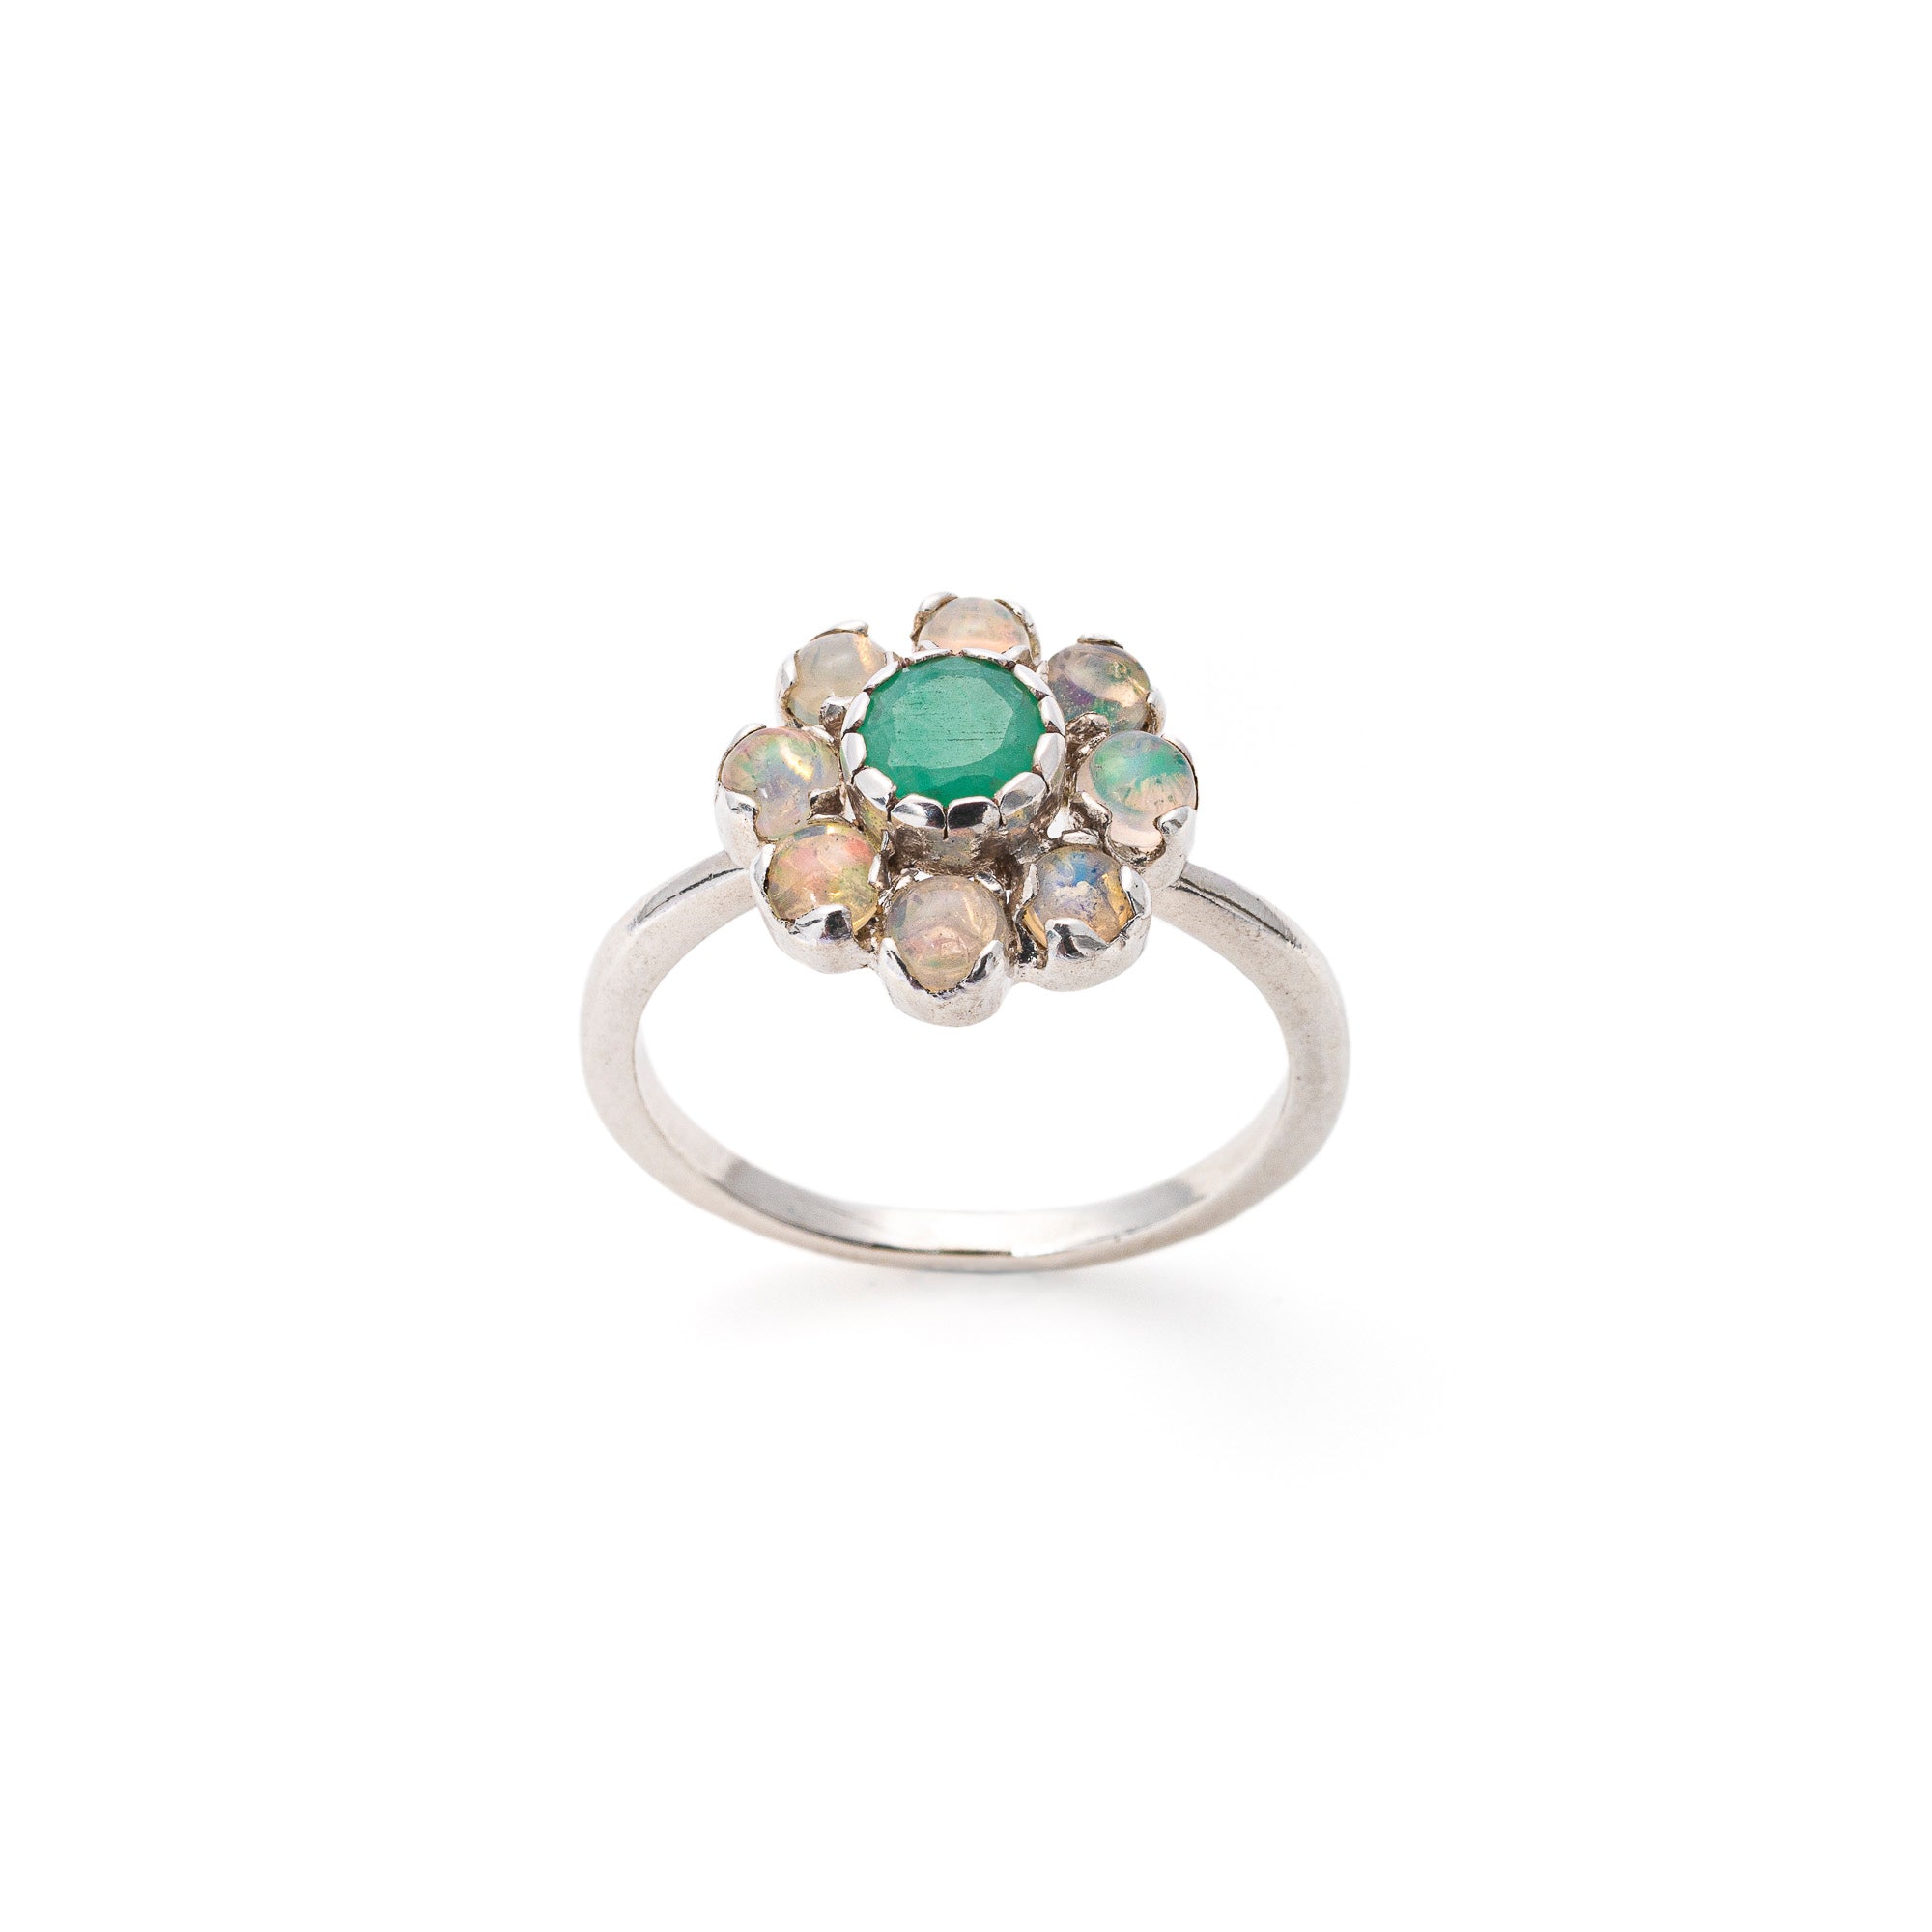 Vintage Flower Opal Ring with Emerald in Center